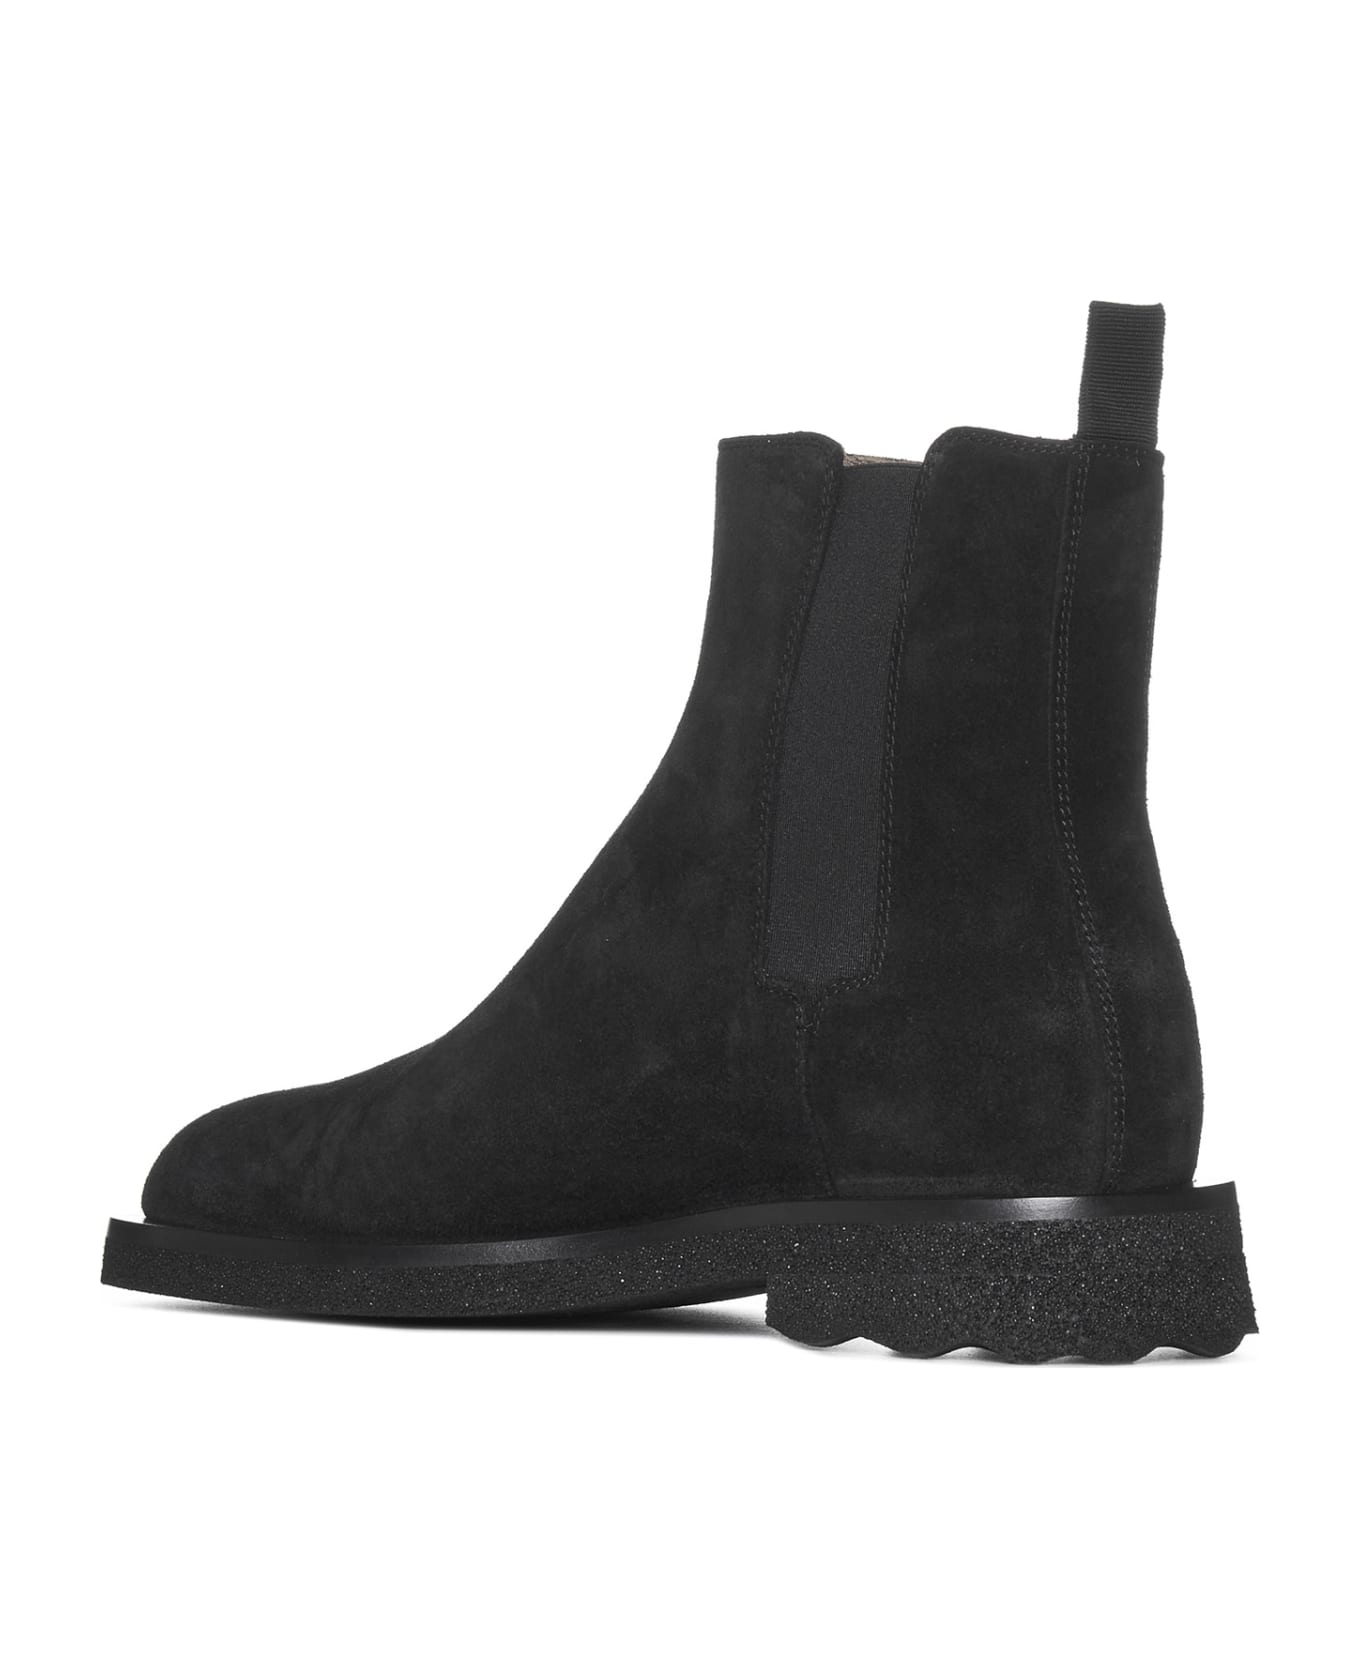 Off-White Boots - Black